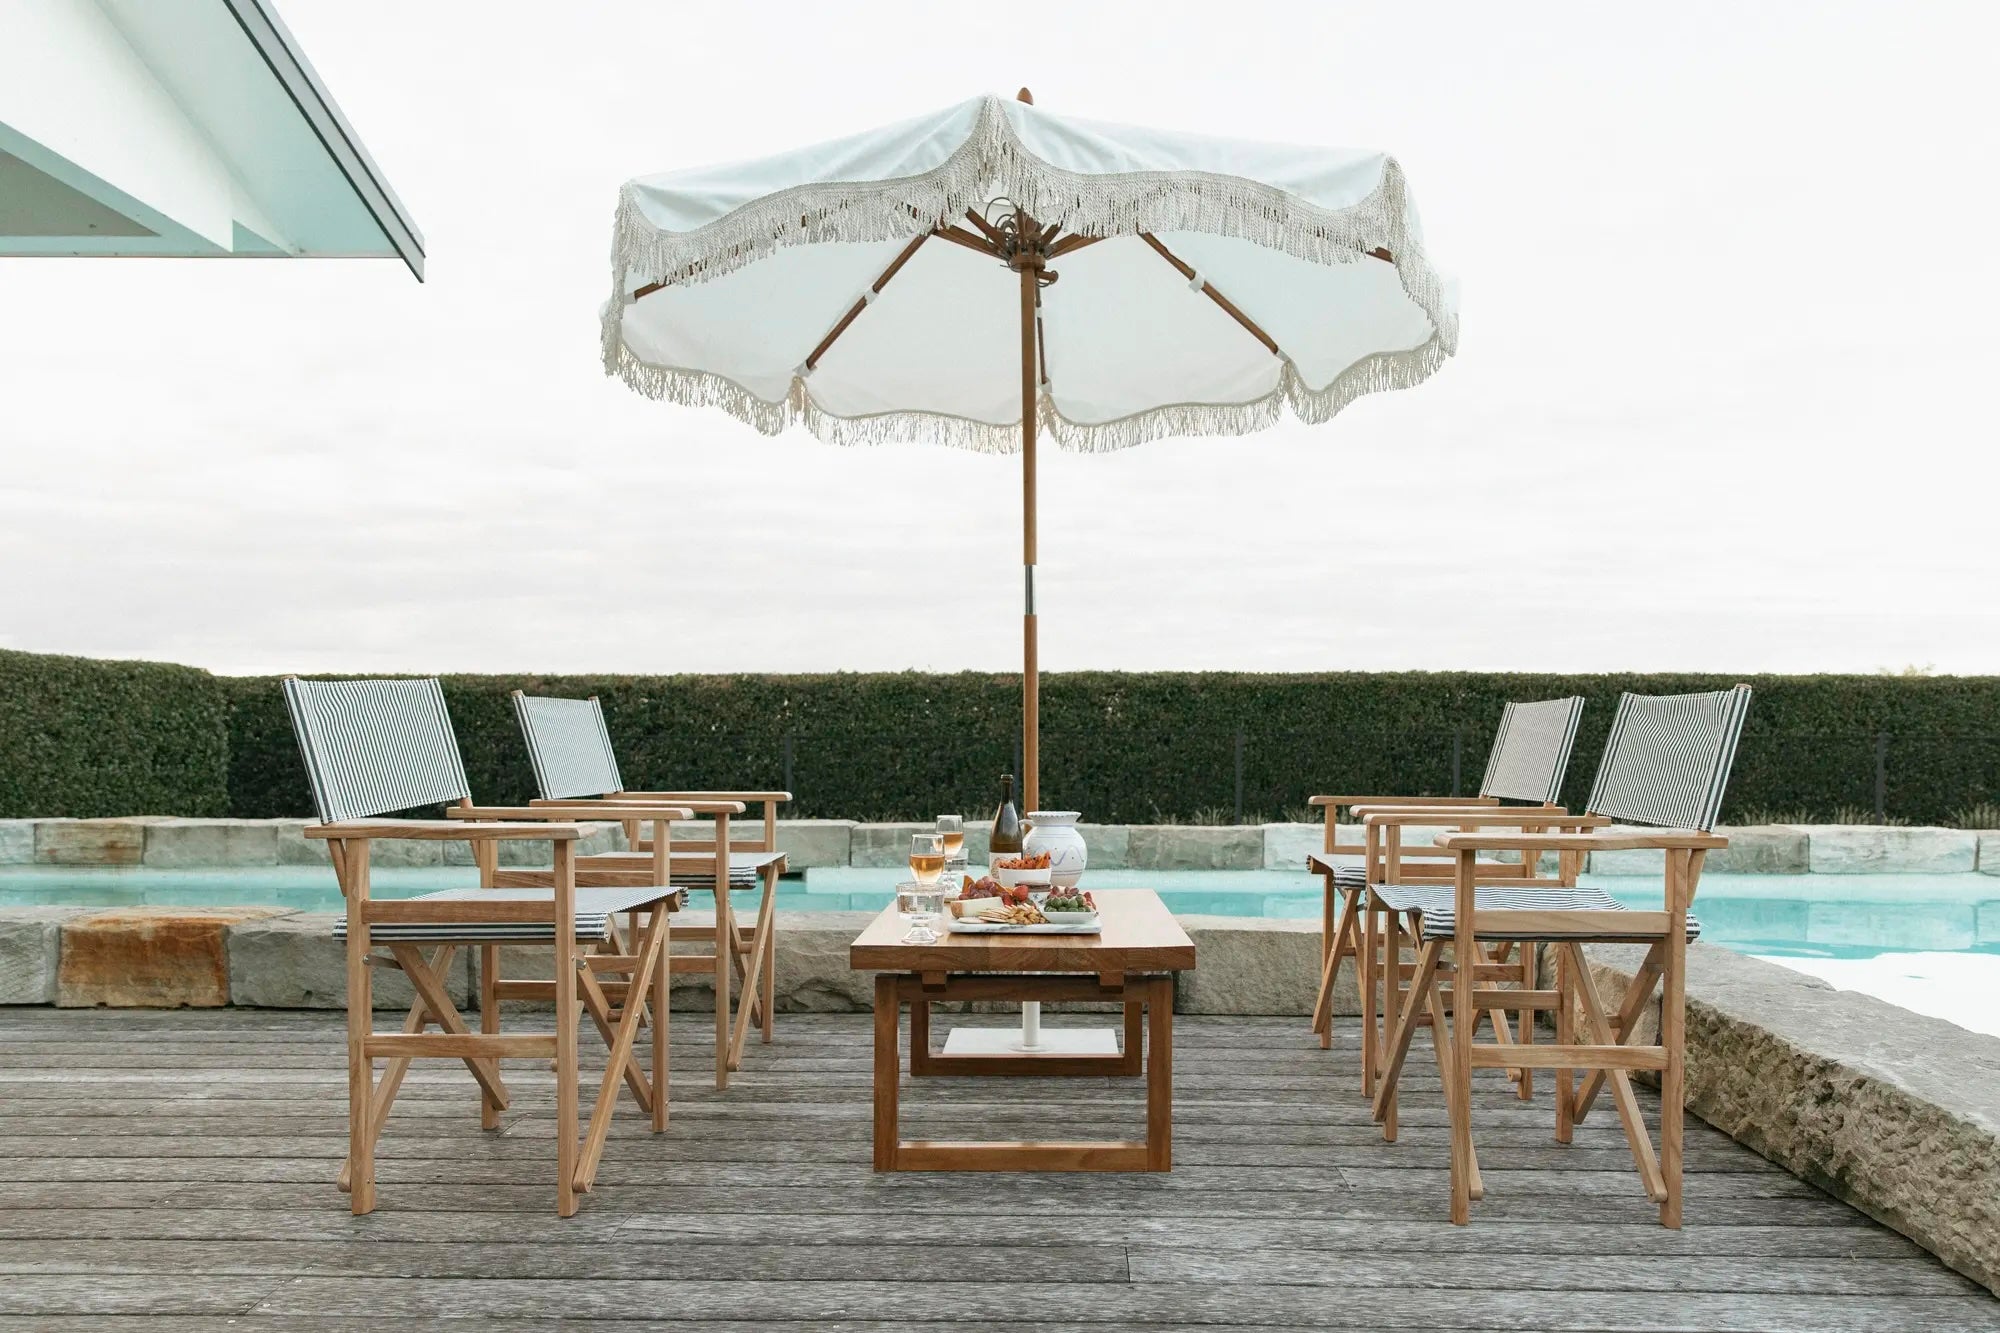 Poolside retreat of umbrella, table and chairs